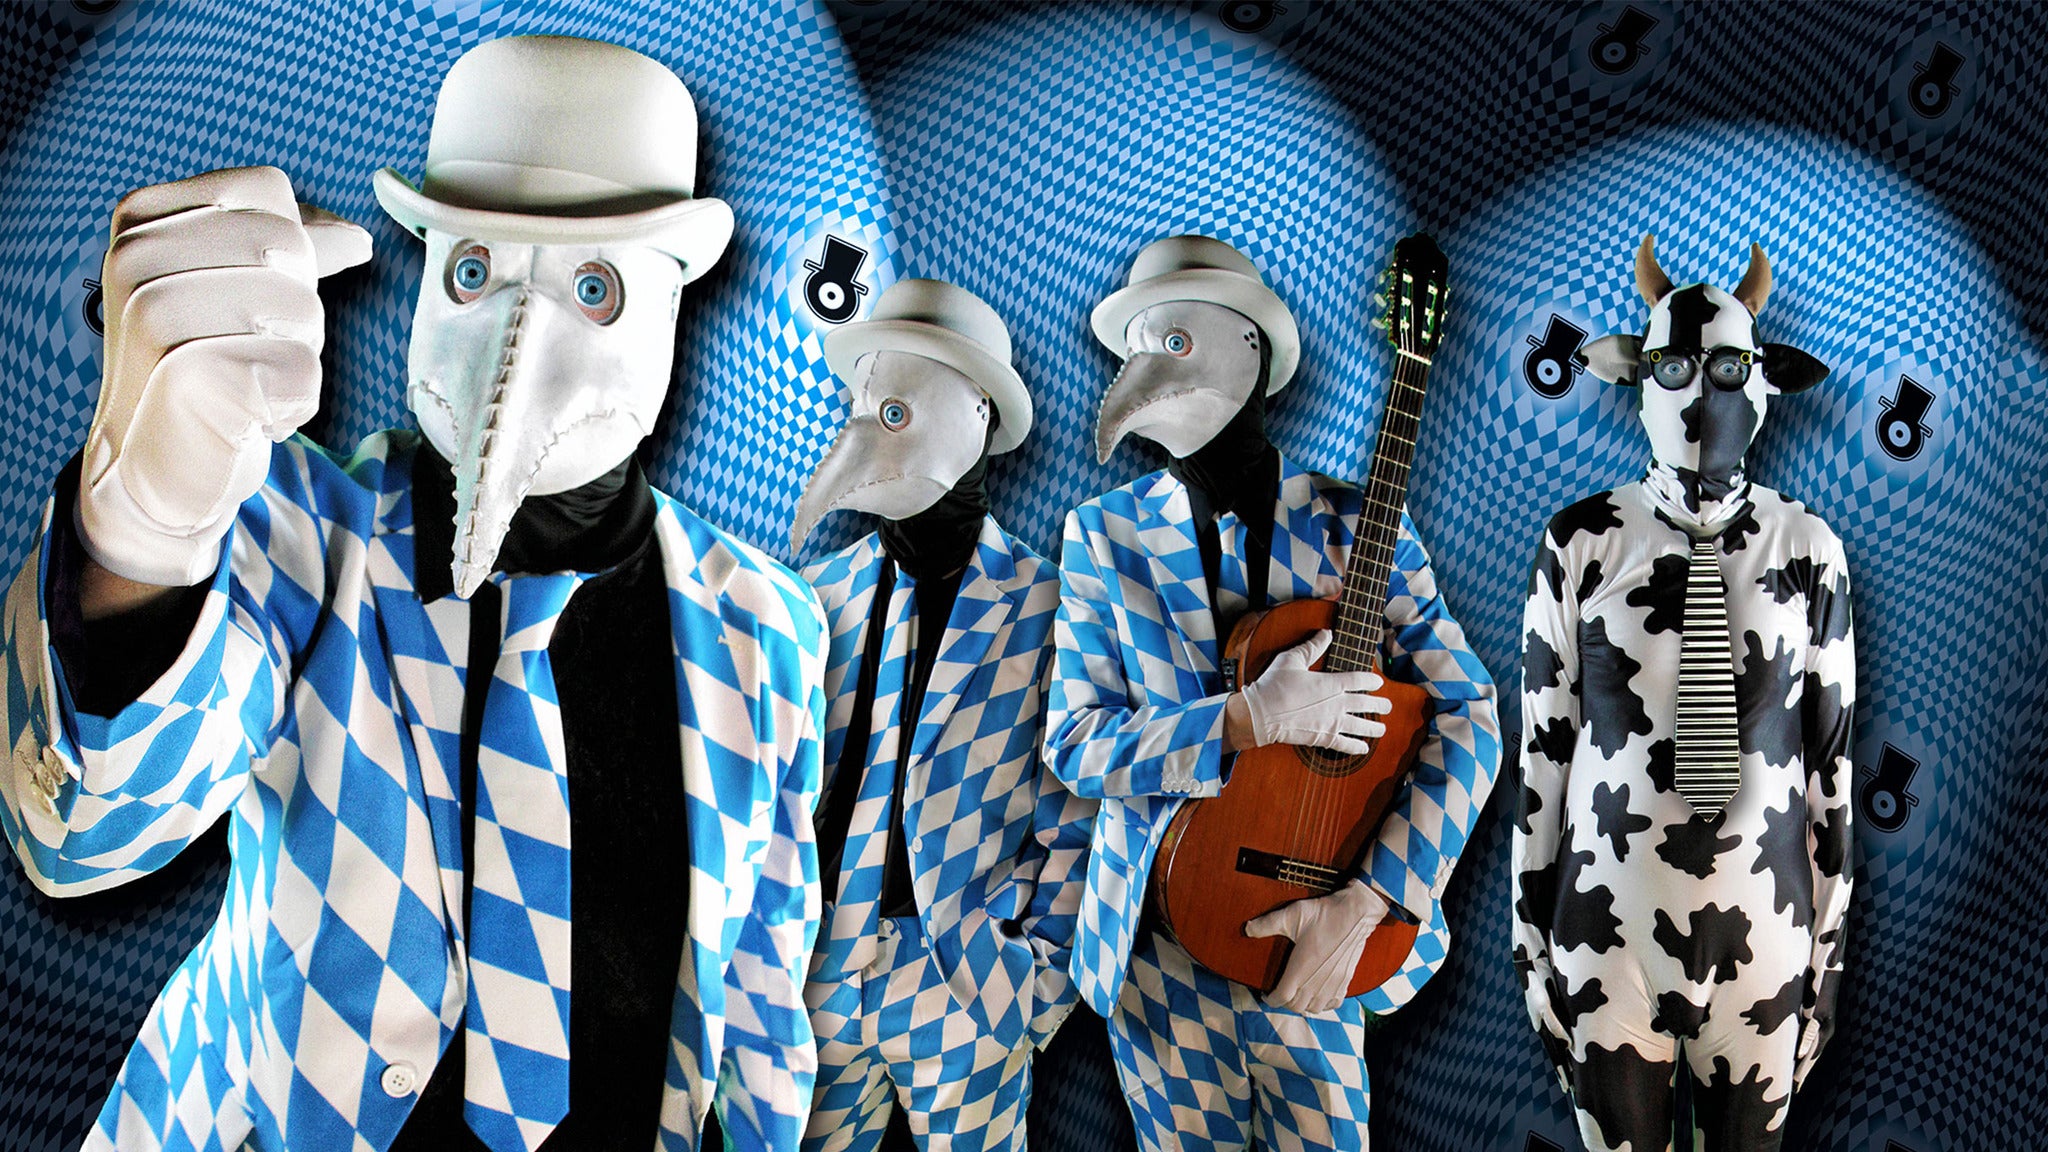 Image used with permission from Ticketmaster | The Residents tickets